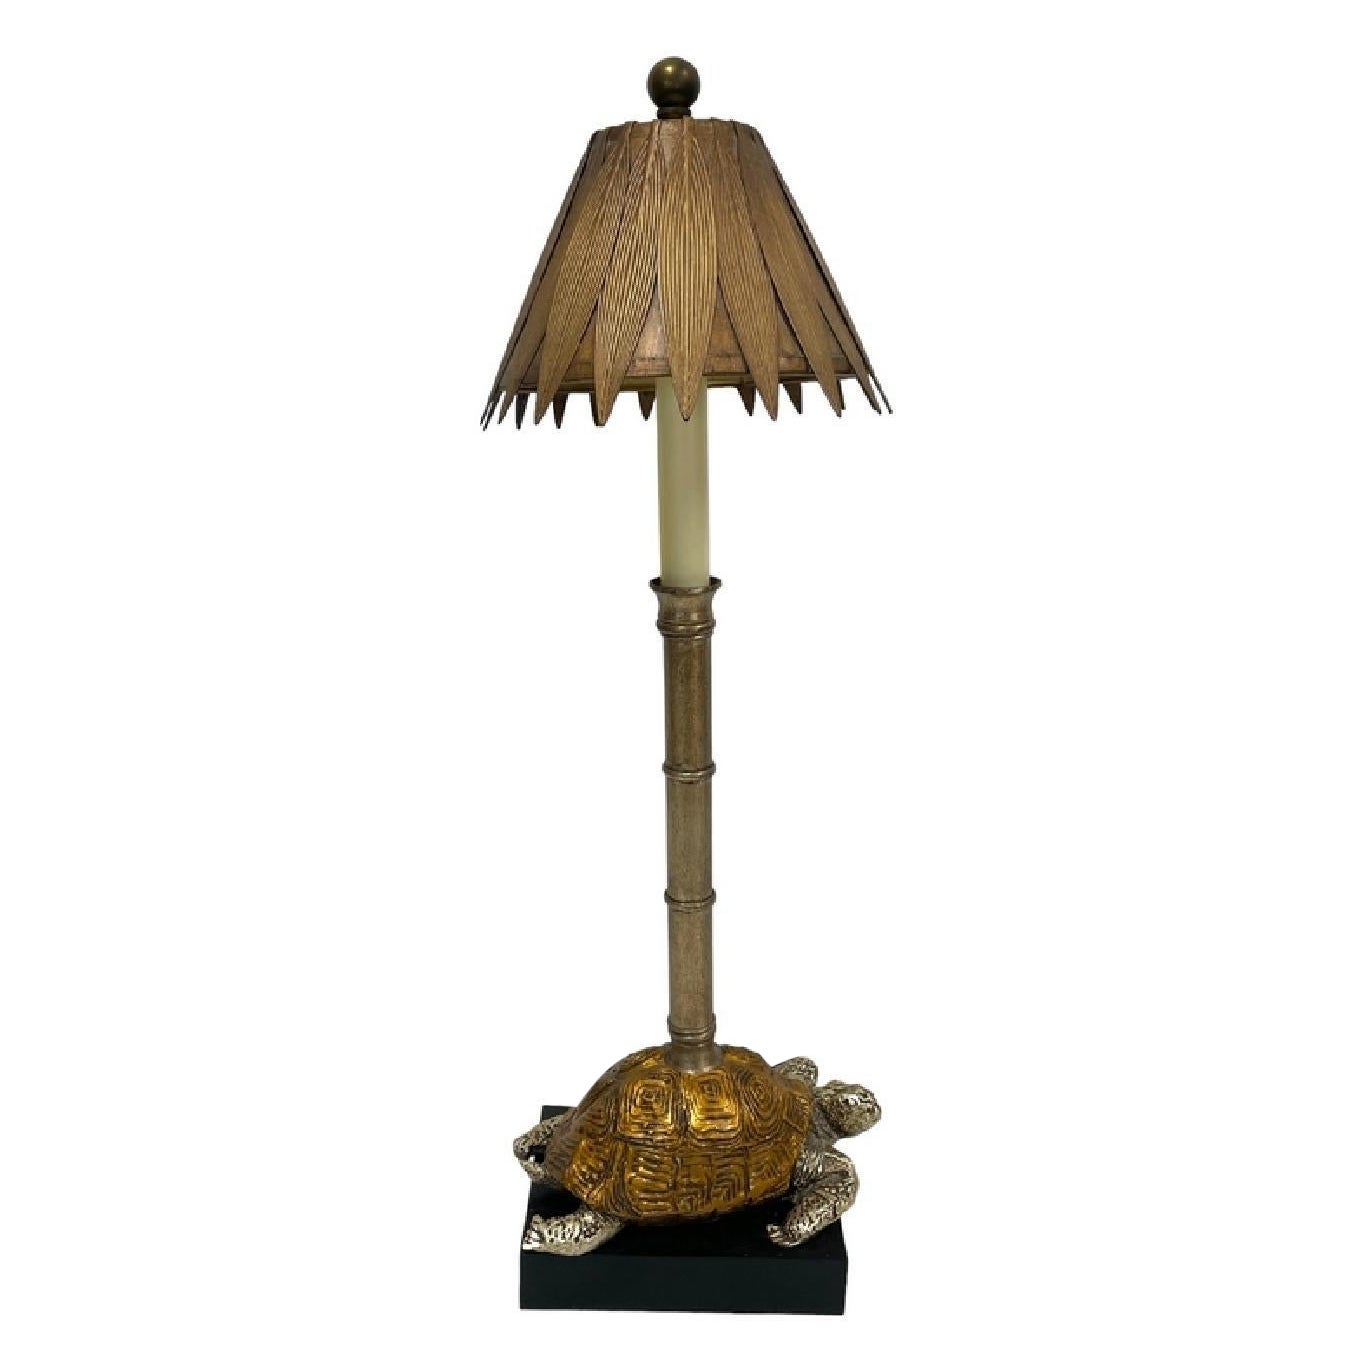 Lamp with Tortoise motif base and Bamboo stem surmounted by Palm Shade For Sale